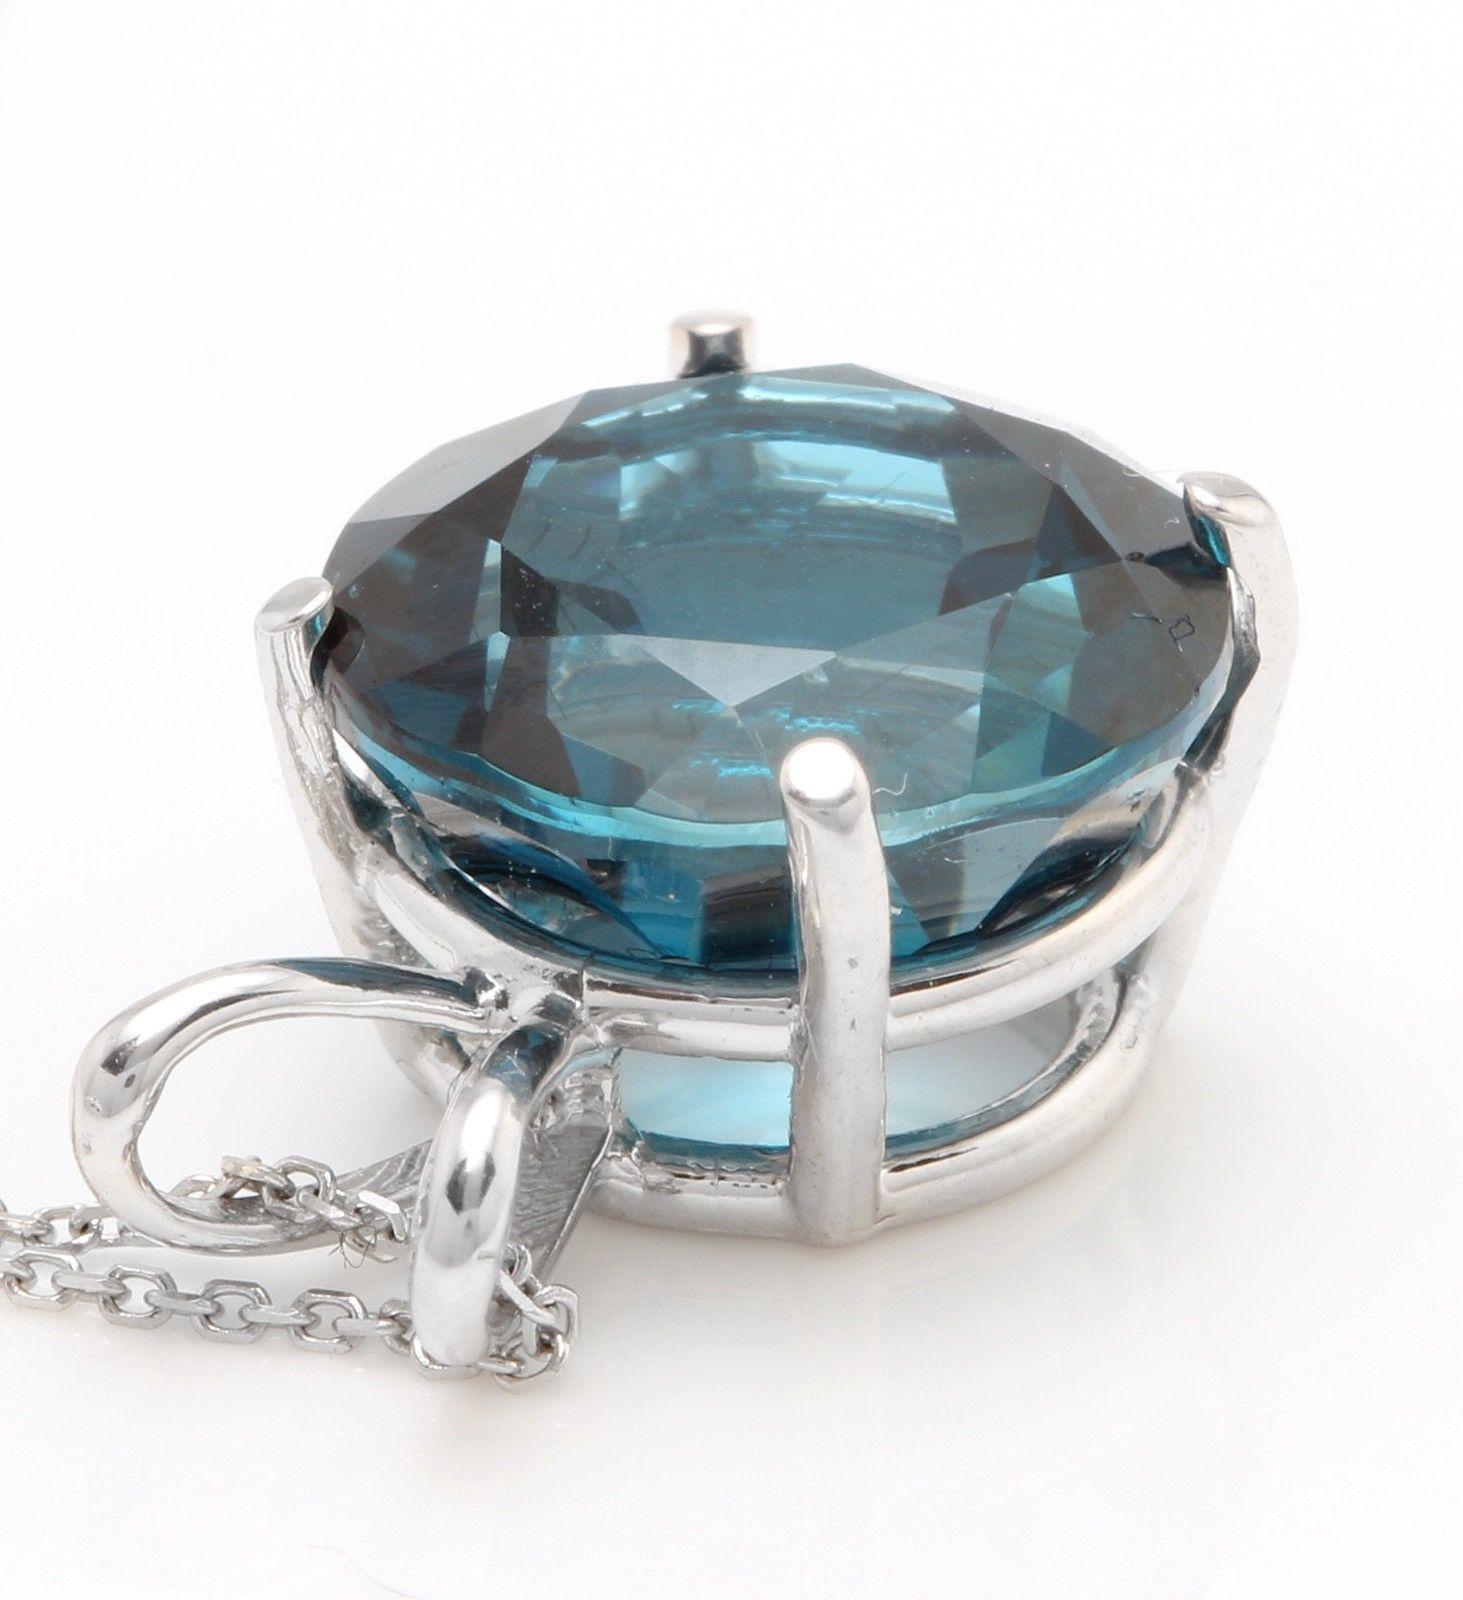 9.35 Carat Natural London Blue Topaz 14K Solid White Gold Pendant with Chain

Amazing looking piece!

Total Natural Round Cut London Blue Topaz Weight: 9.35 Carat

Chain Length is: 16 inches

Pendant measures: Approx. 12 mm

Total item weight is